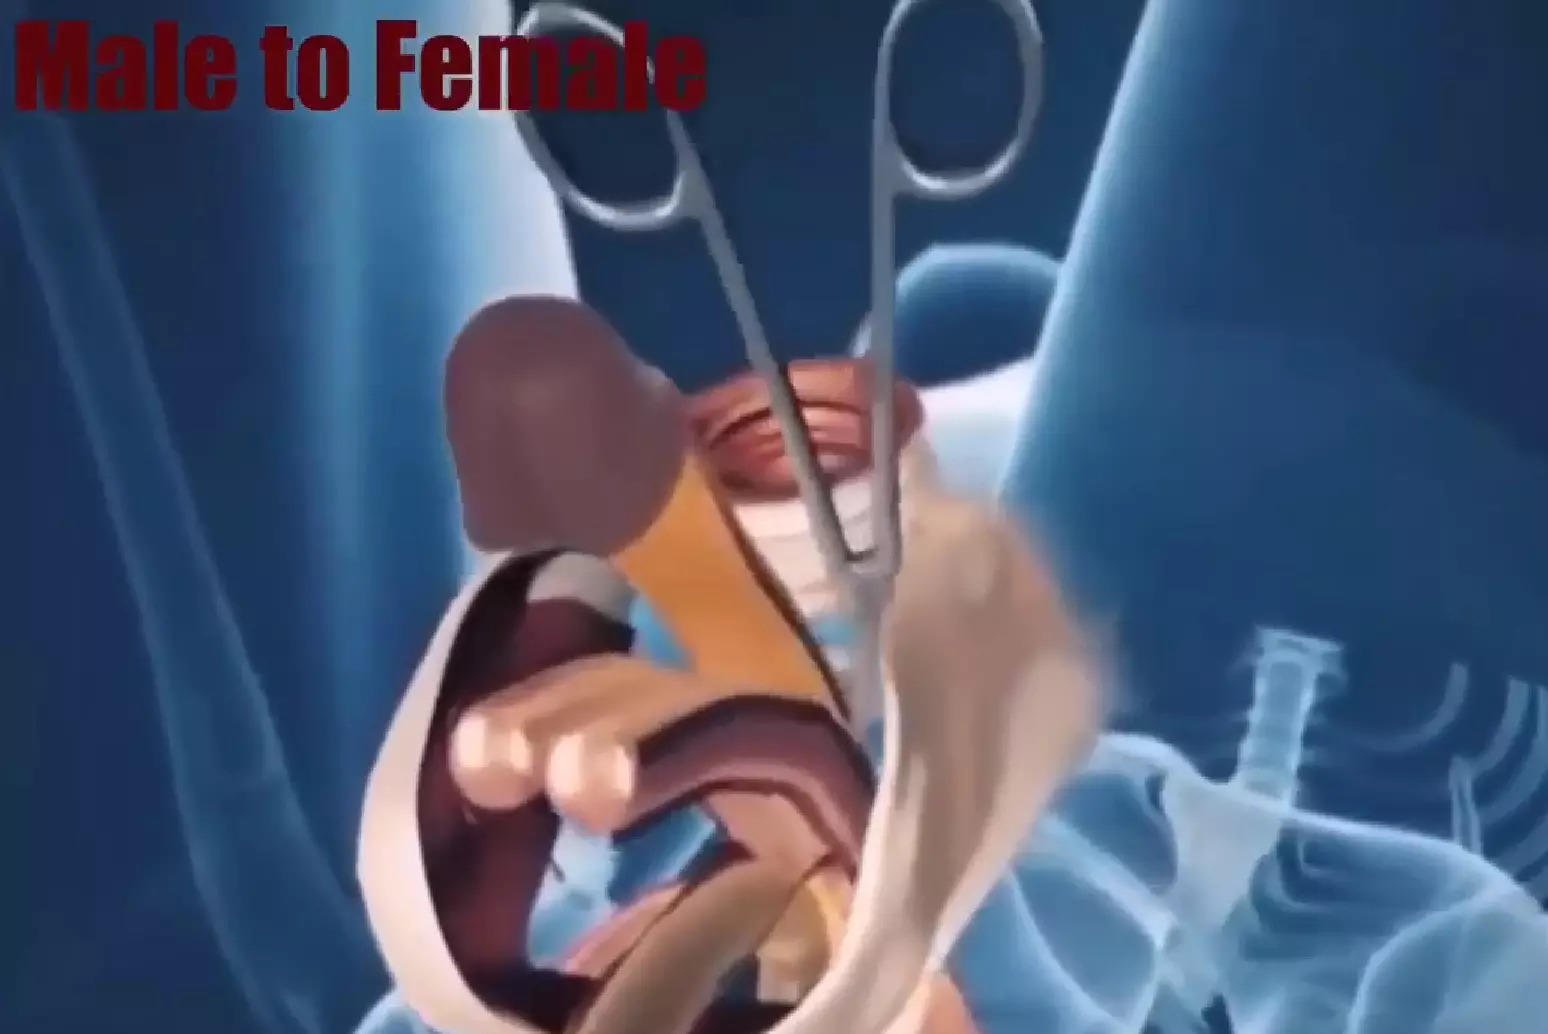 Animated video showing male to female Gender-affirming surgery goes viral,  fascinates viewers